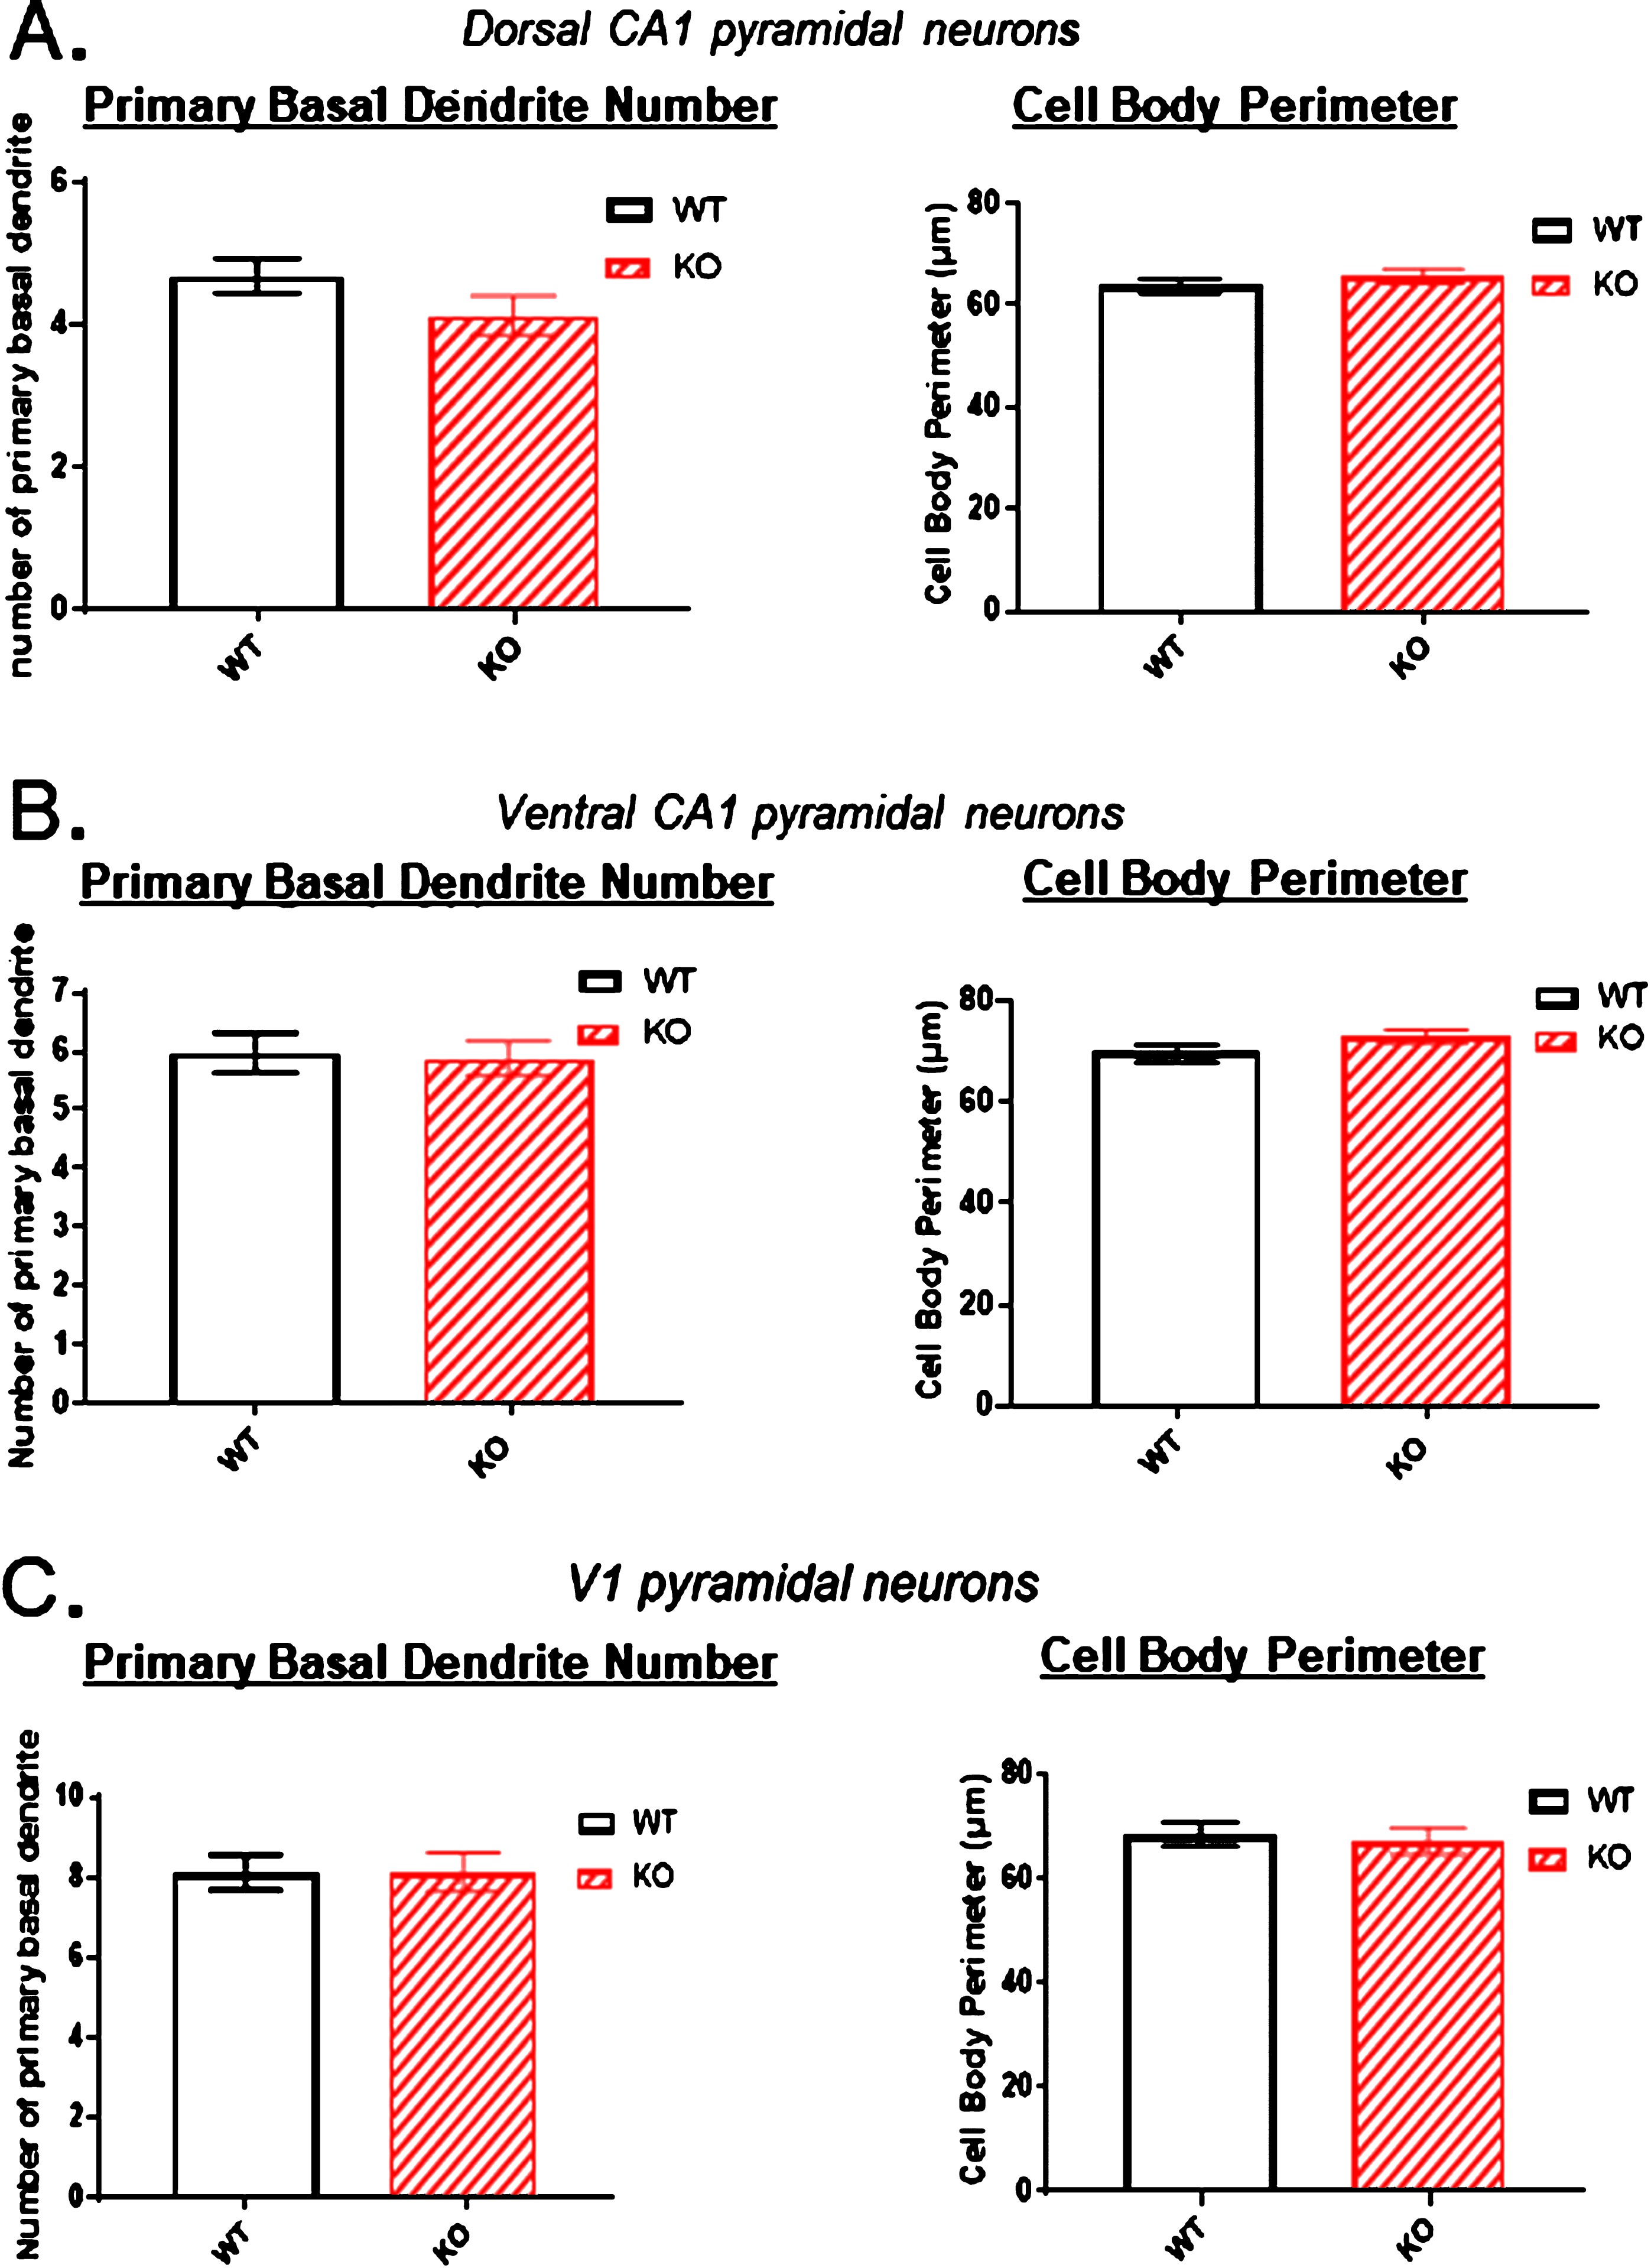 Because of the significant reduction in the dorsal CA1 region arborization observed in KO versus WT mice (Figs. 2–5), the number of primary basal dendrites and the cell body perimeters were measured in A) the dorsal CA1 region, B) the ventral CA1 region, and C) the primary sensory cortex. There were no significant differences in the number of primary basal dendrites or in the cell body perimeters in KO versus WT mice in any of the three regions. Data represent the mean±SEM of measurements from 9 WT and 15 KO mice, and were analyzed by Student’s t-test for unpaired data.